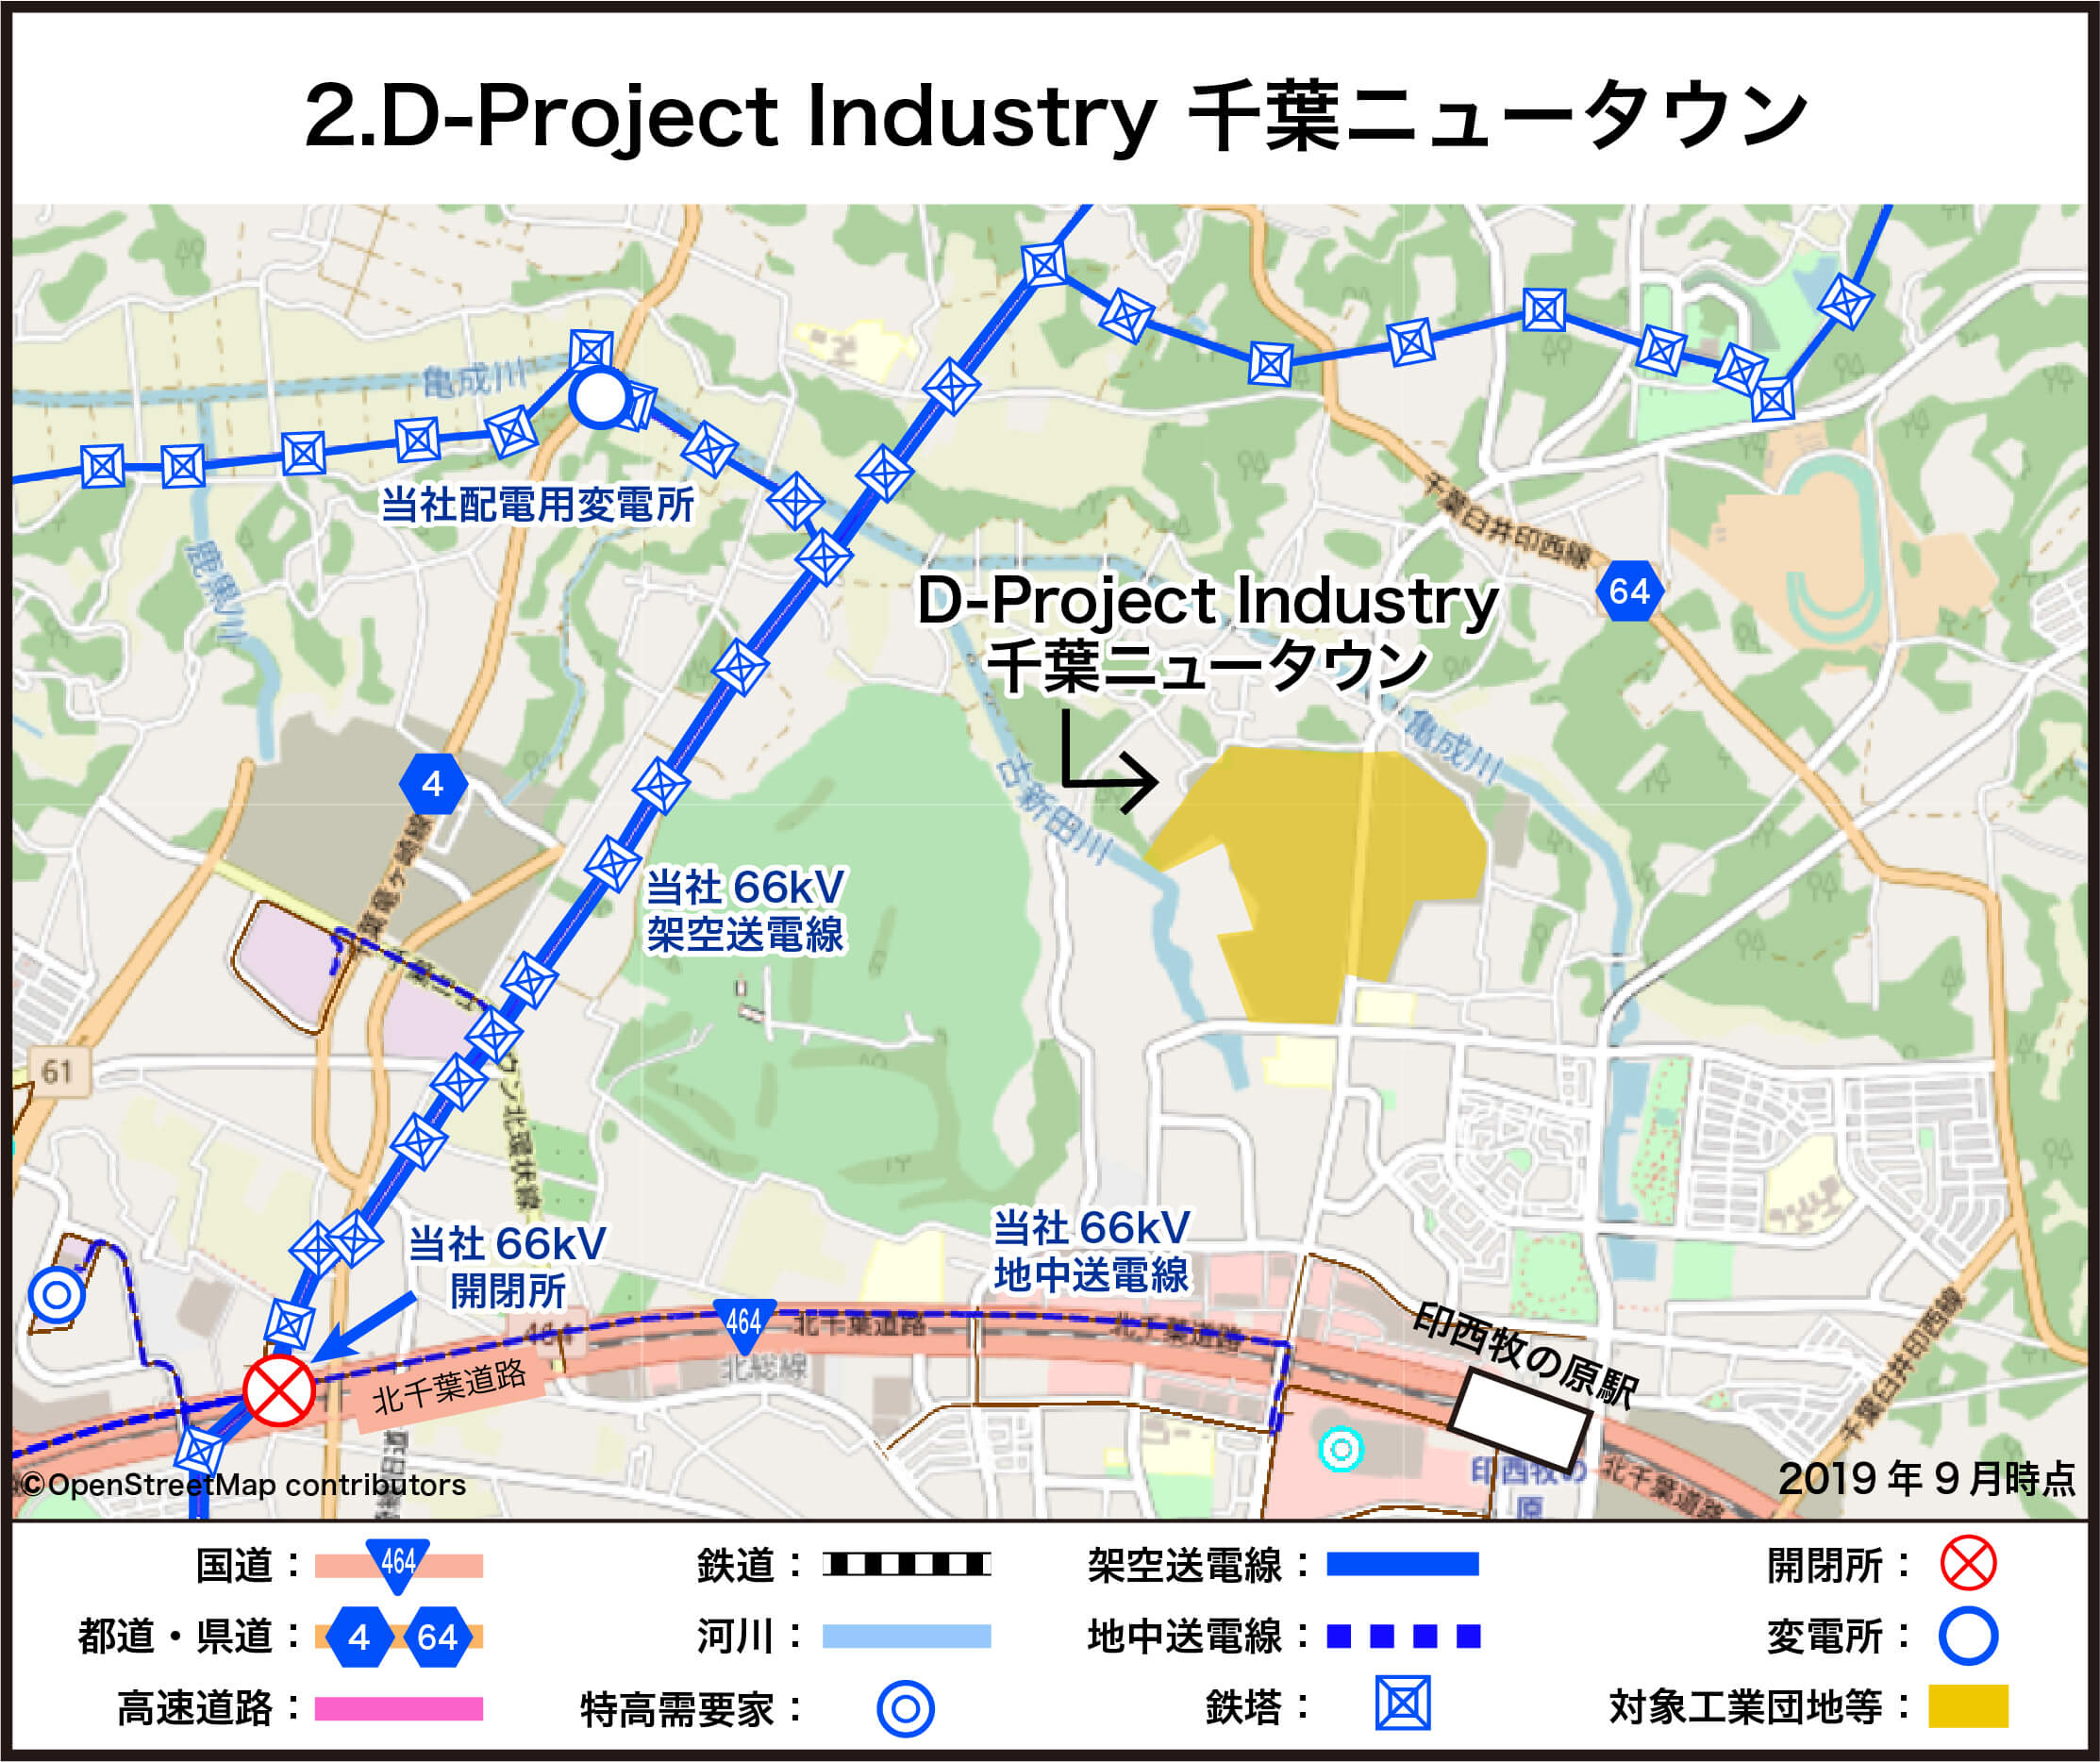 D-Project Industry 千葉ニュータウン